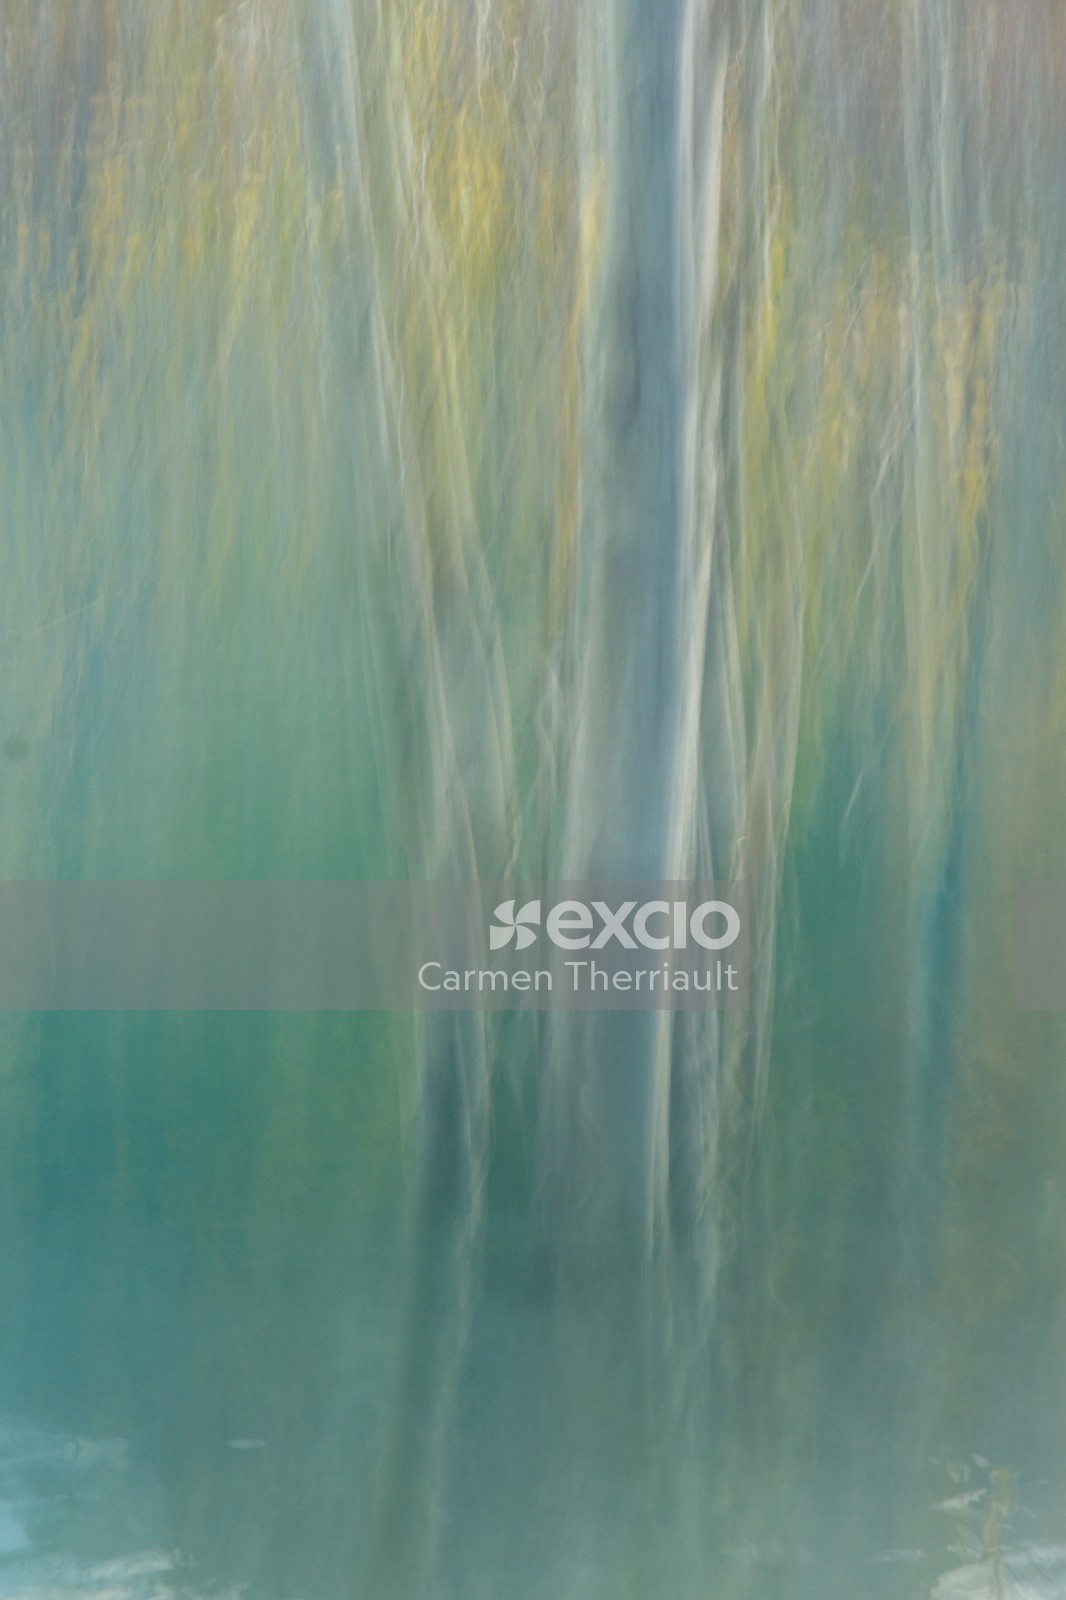 Abstract trees in water